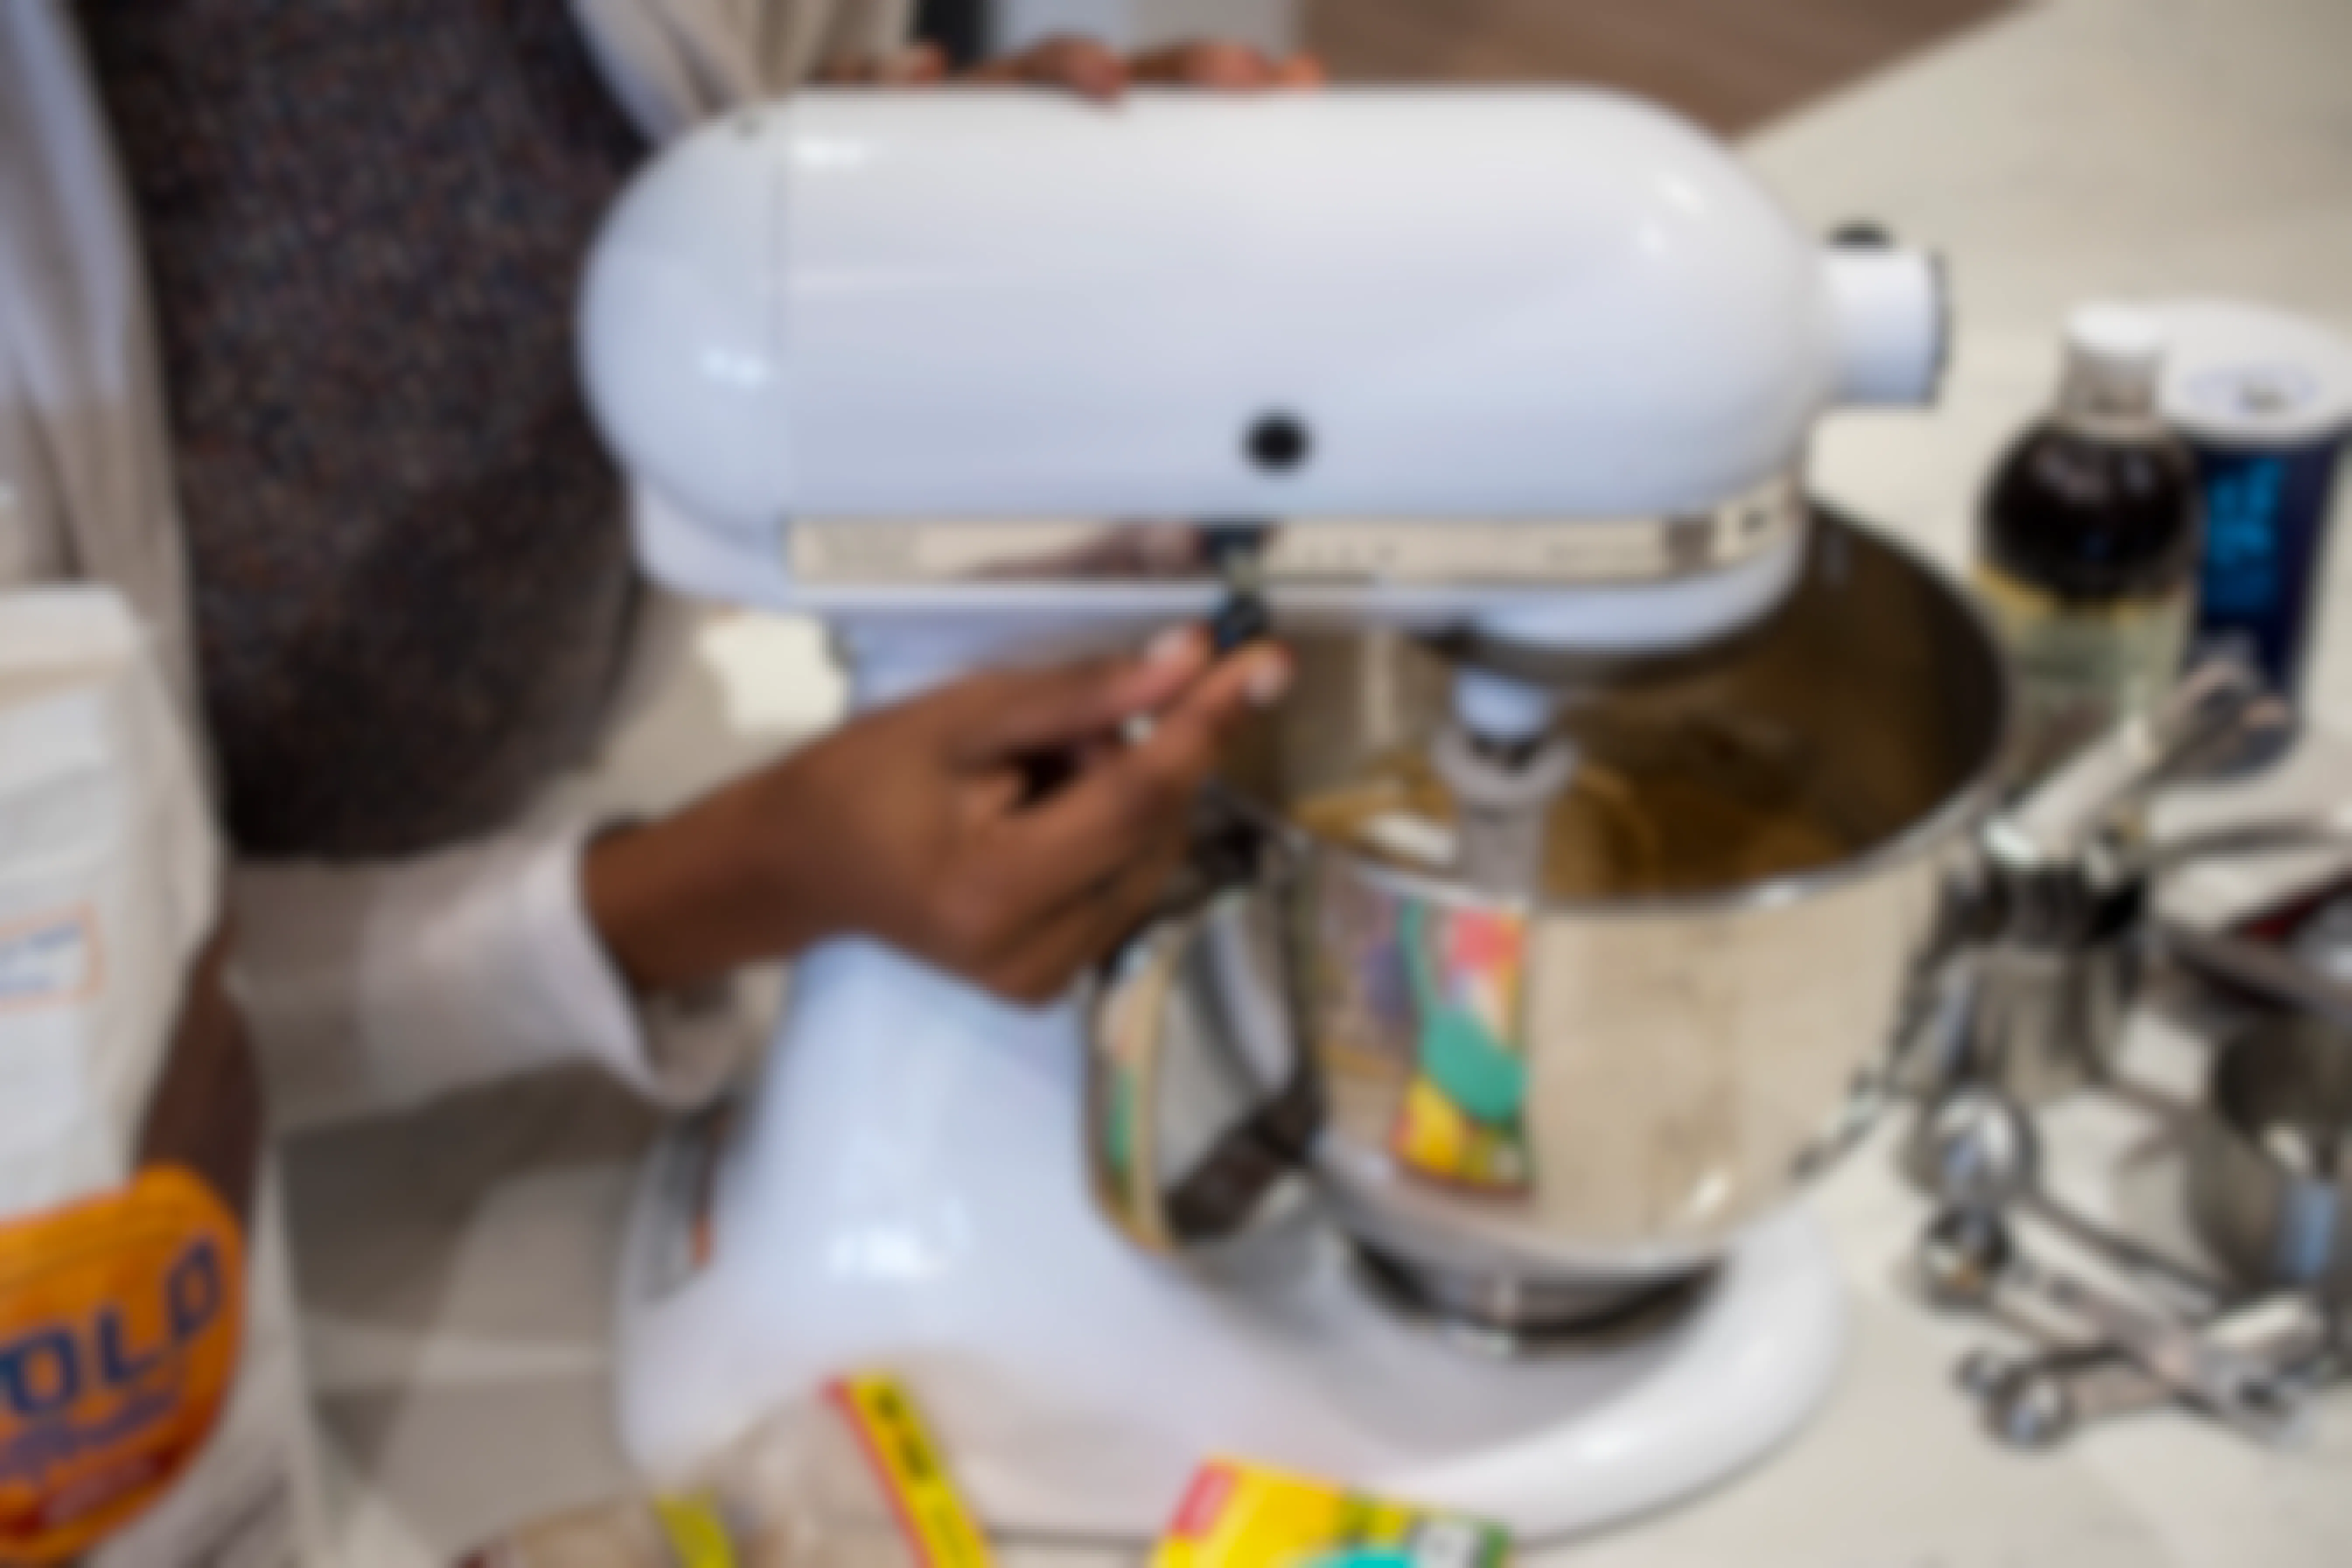 A person turning on a KitchenAid mixer